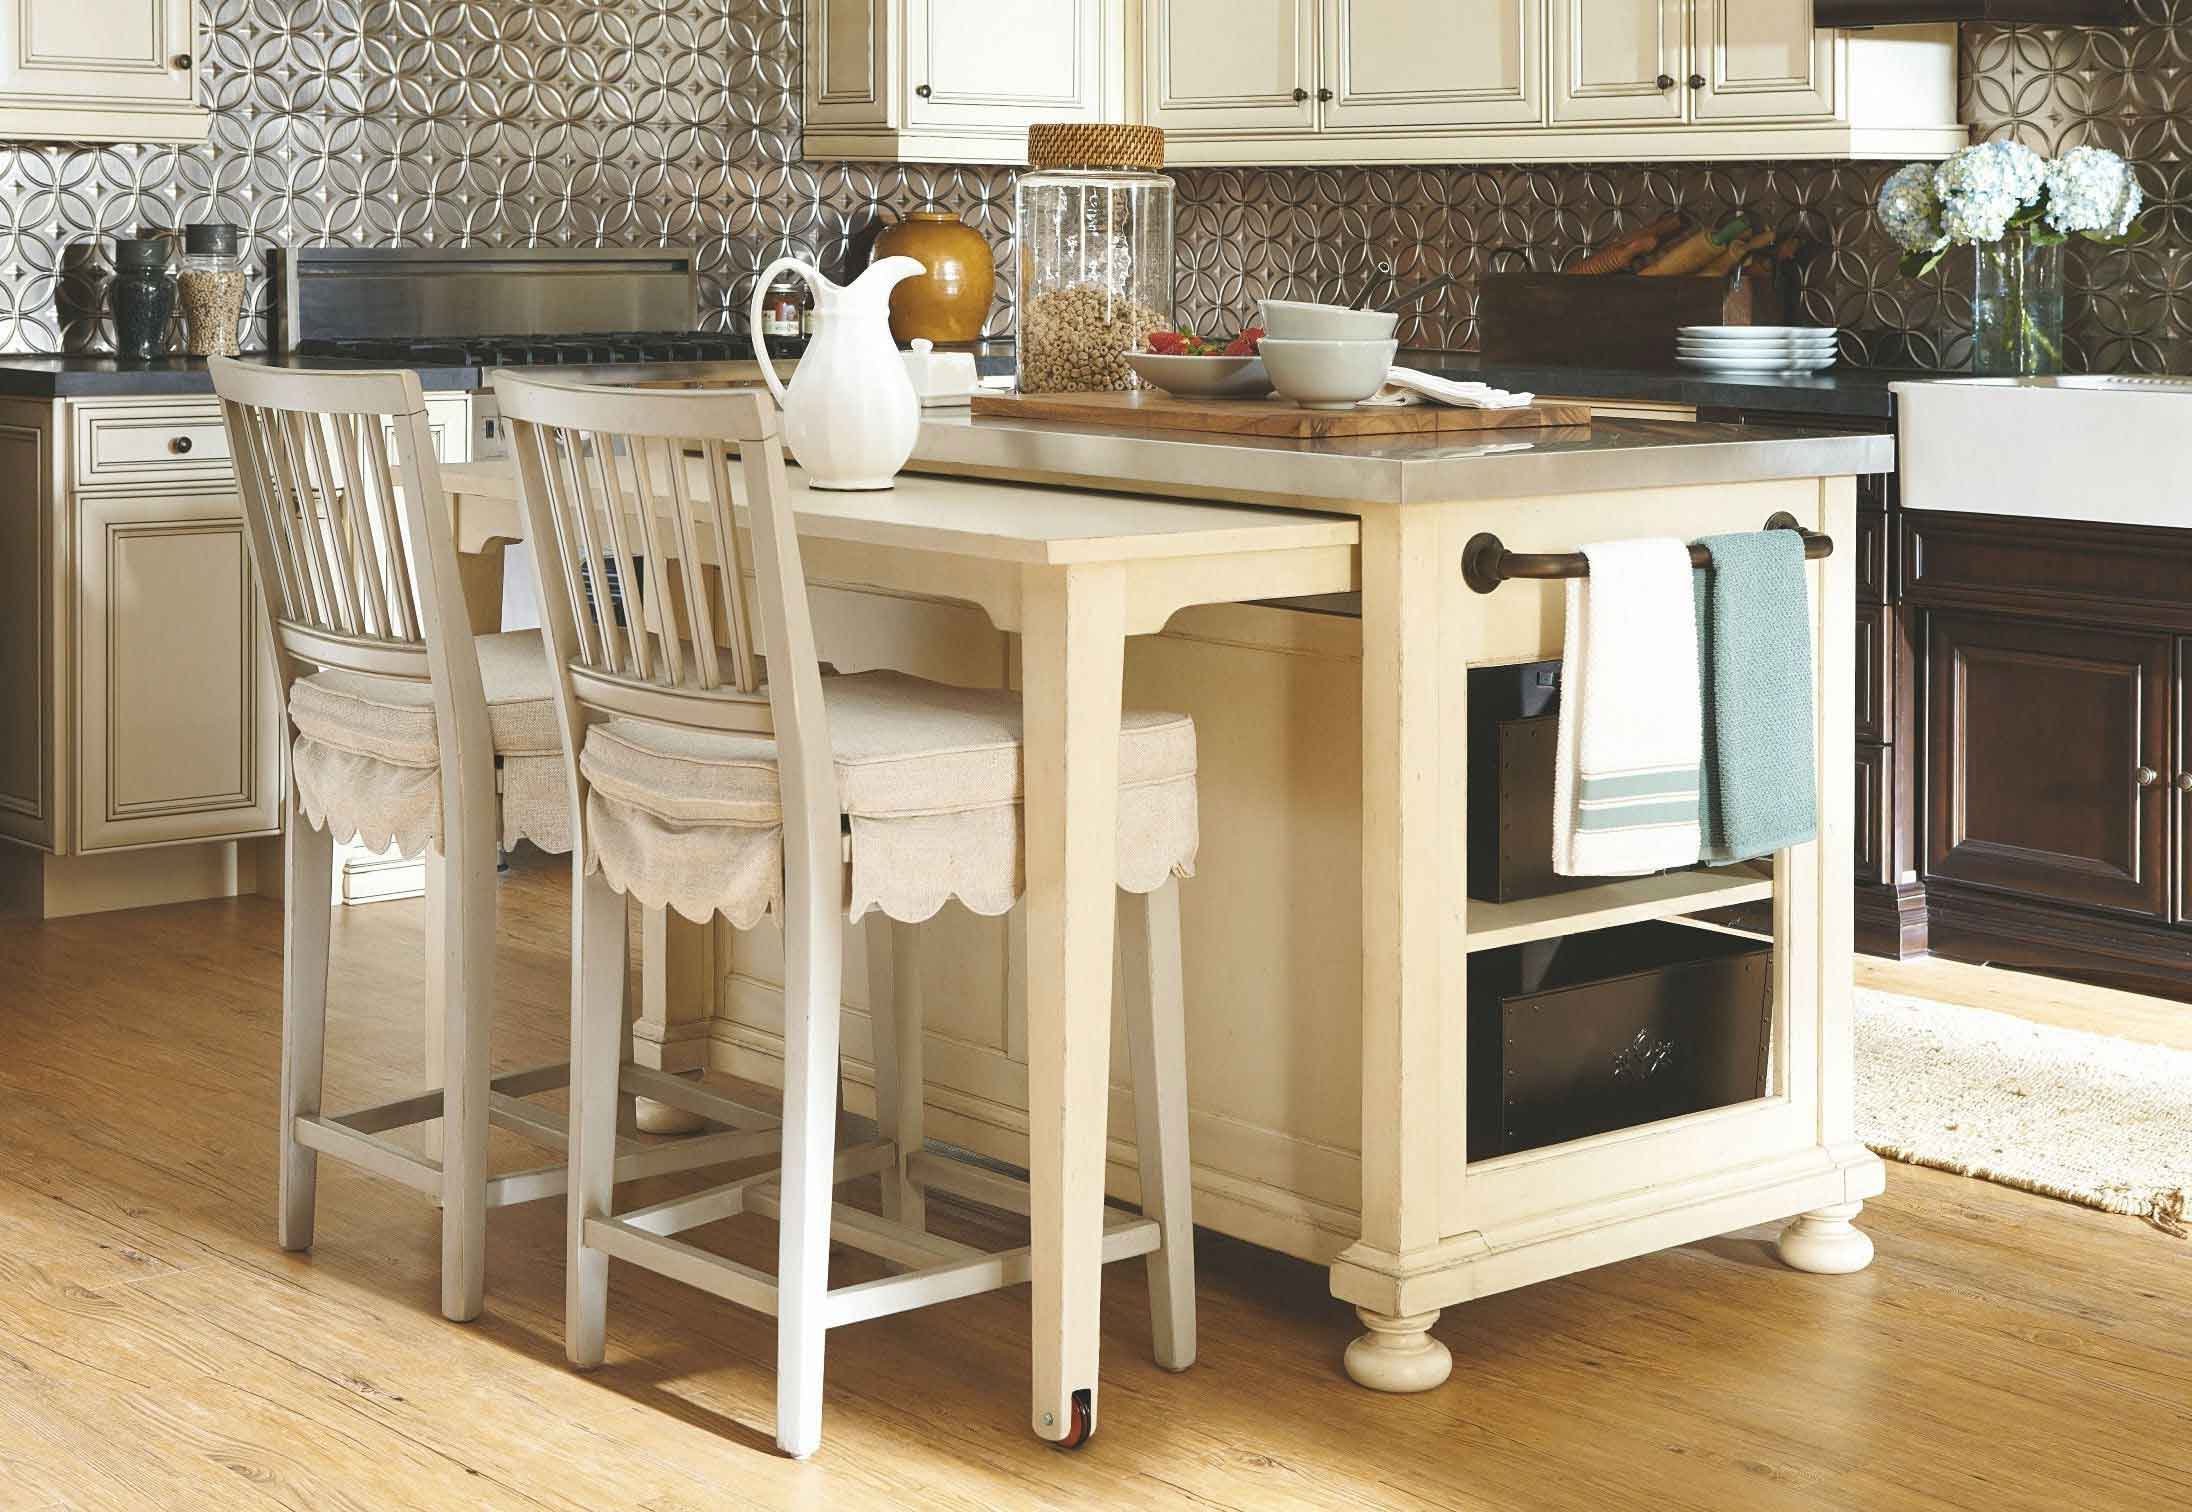 5 Kitchen Island With Pull Out Table Ideas To Overcome Small Kitchen Space | Roy Home Design